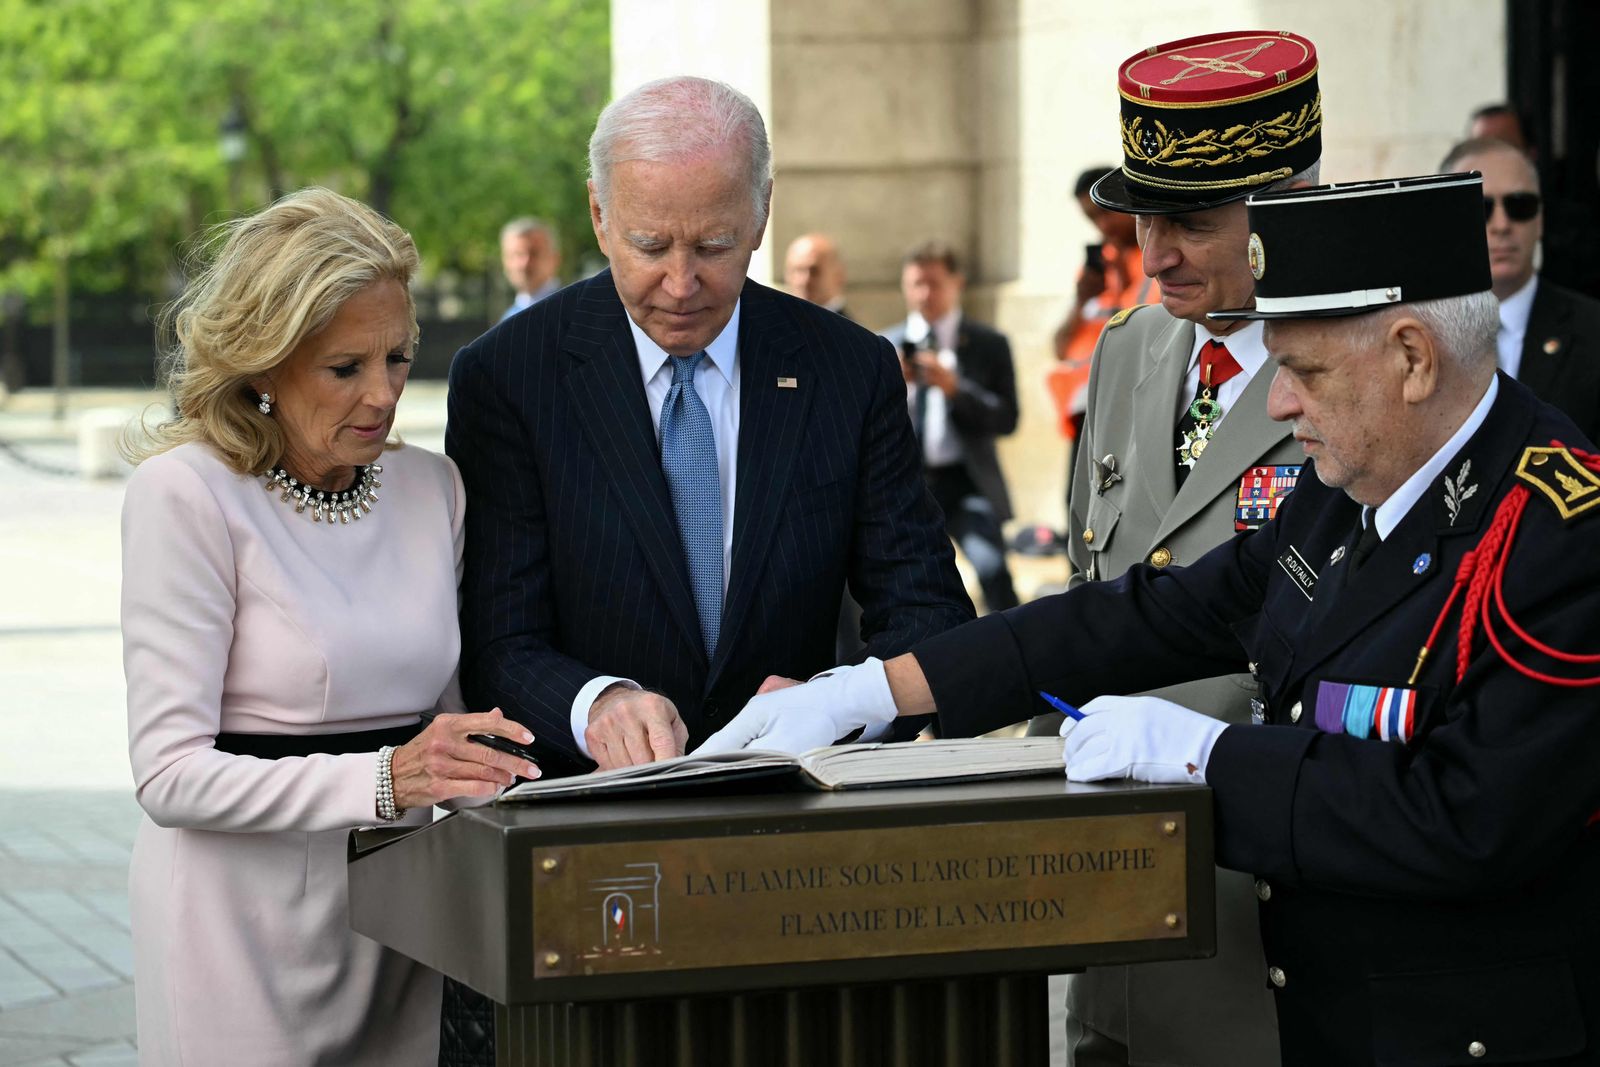 US President Joe Biden (C), flanked by US First Lady Jill Biden (L), participates in a ceremony as part of a state visit to France, at the Arc de Triomphe in Paris on June 8, 2024. Biden is due to meet Macron for talks at the Elysee Palace in Paris followed by a state banquet given in his honour, with Ukraine's battle against the Russian invasion the dominant topic. (Photo by SAUL LOEB / AFP)